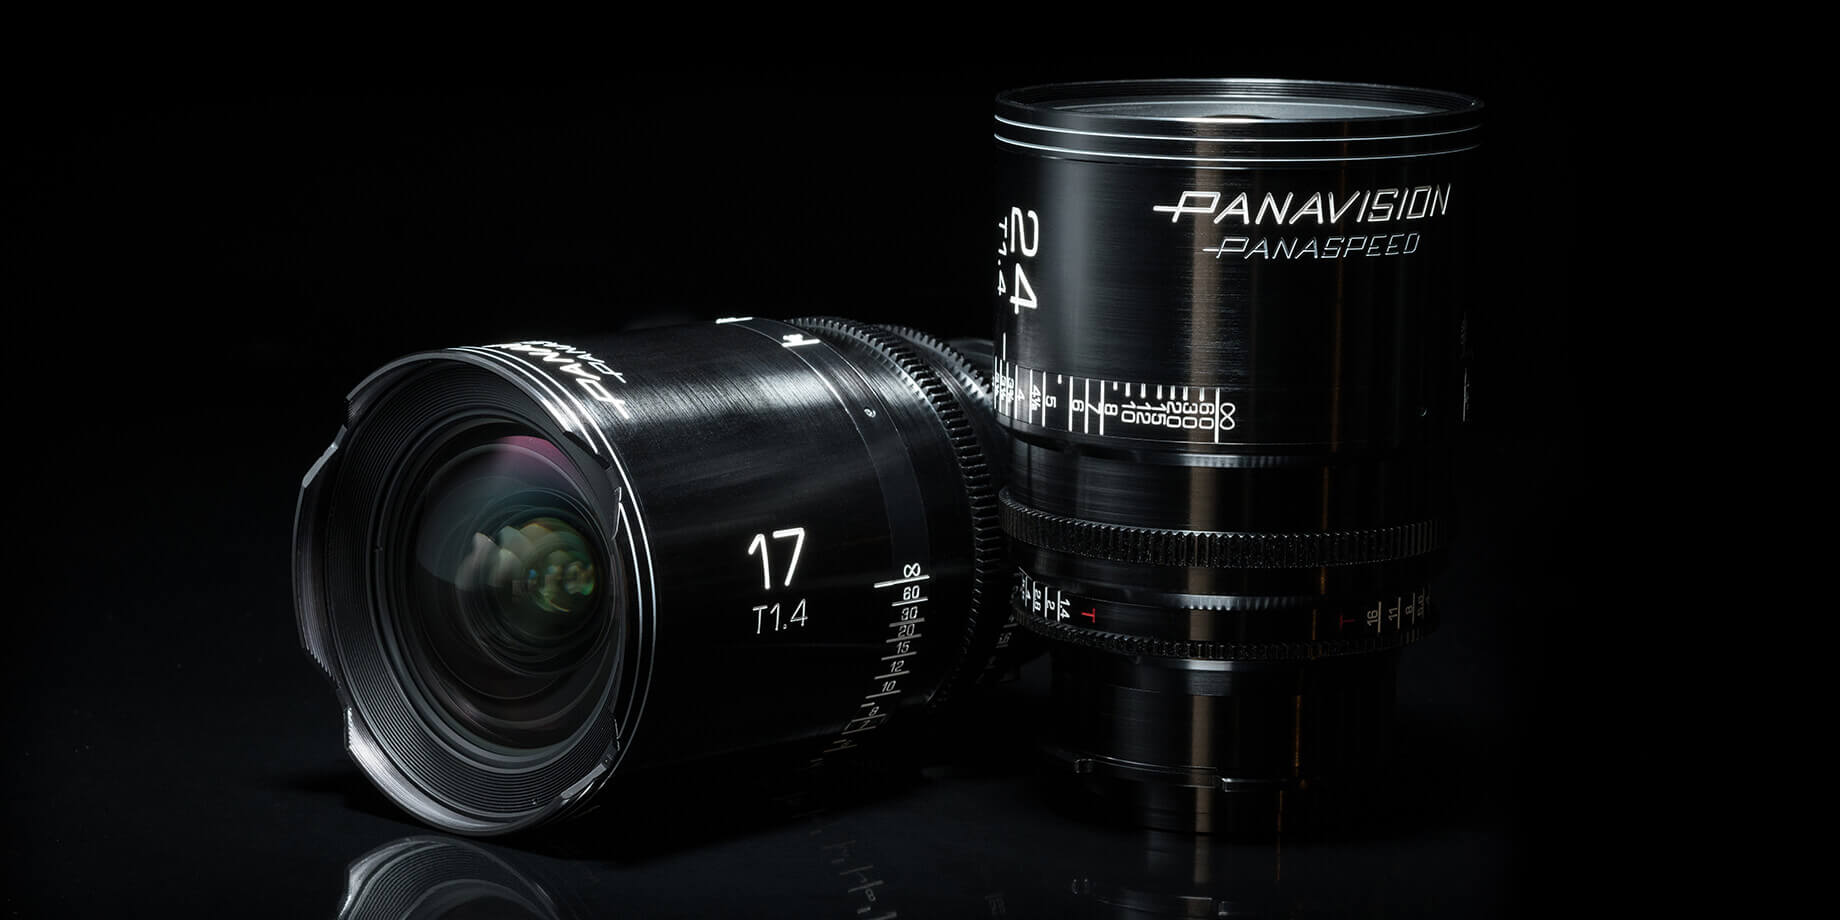 Two Panavision Panaspeed lenses on a black background